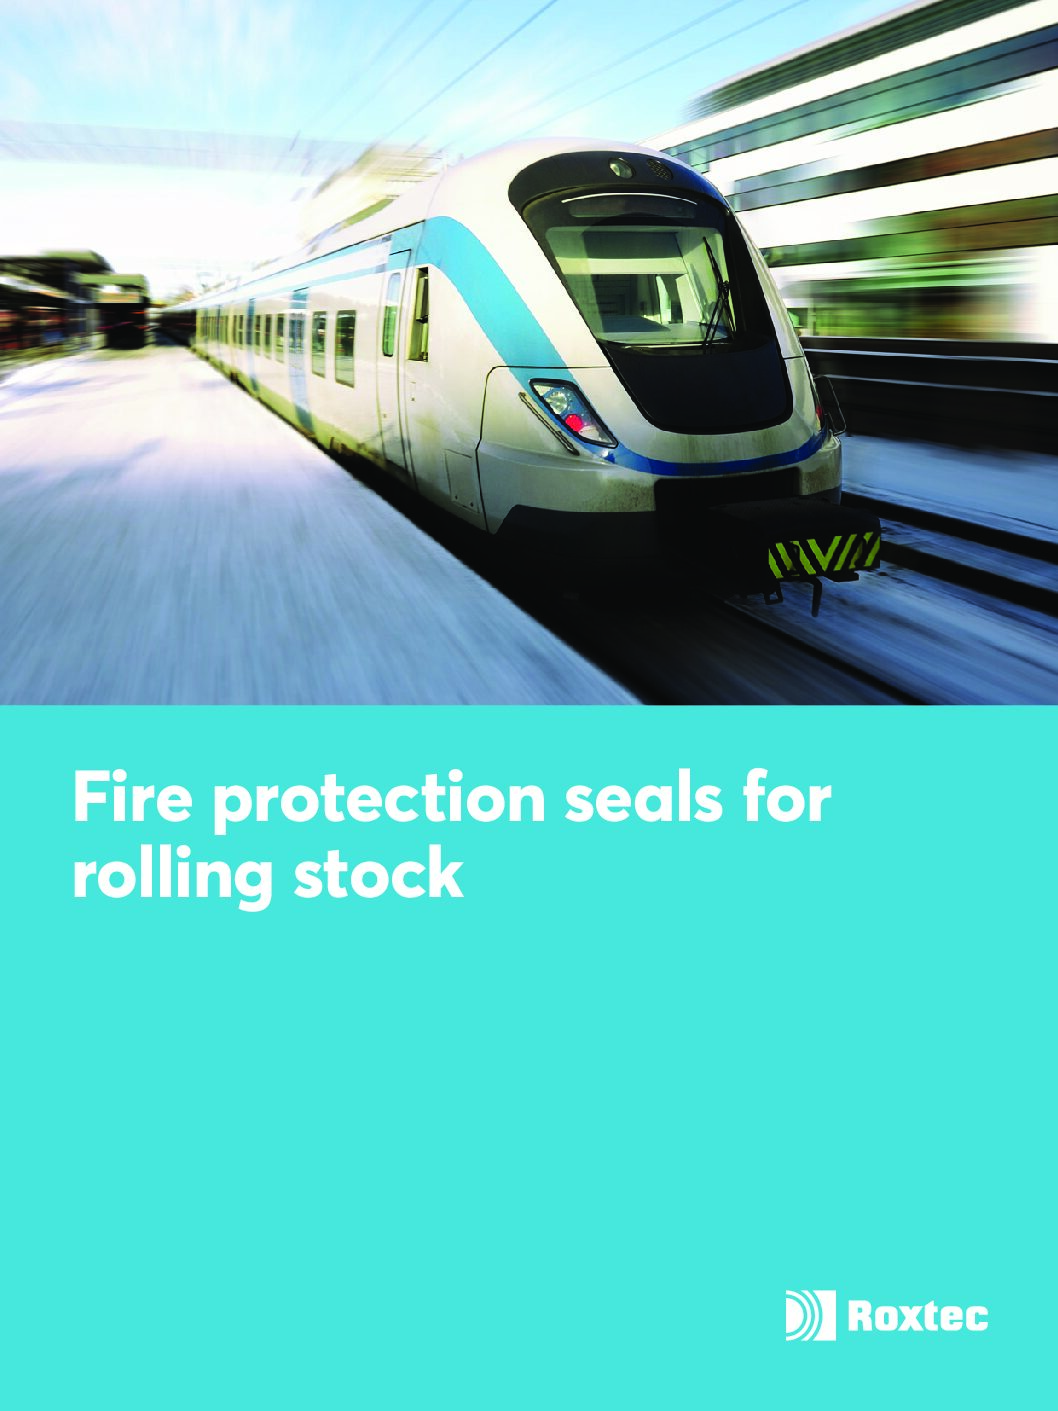 Roxtec: Fire Protection Seals for Rolling Stock